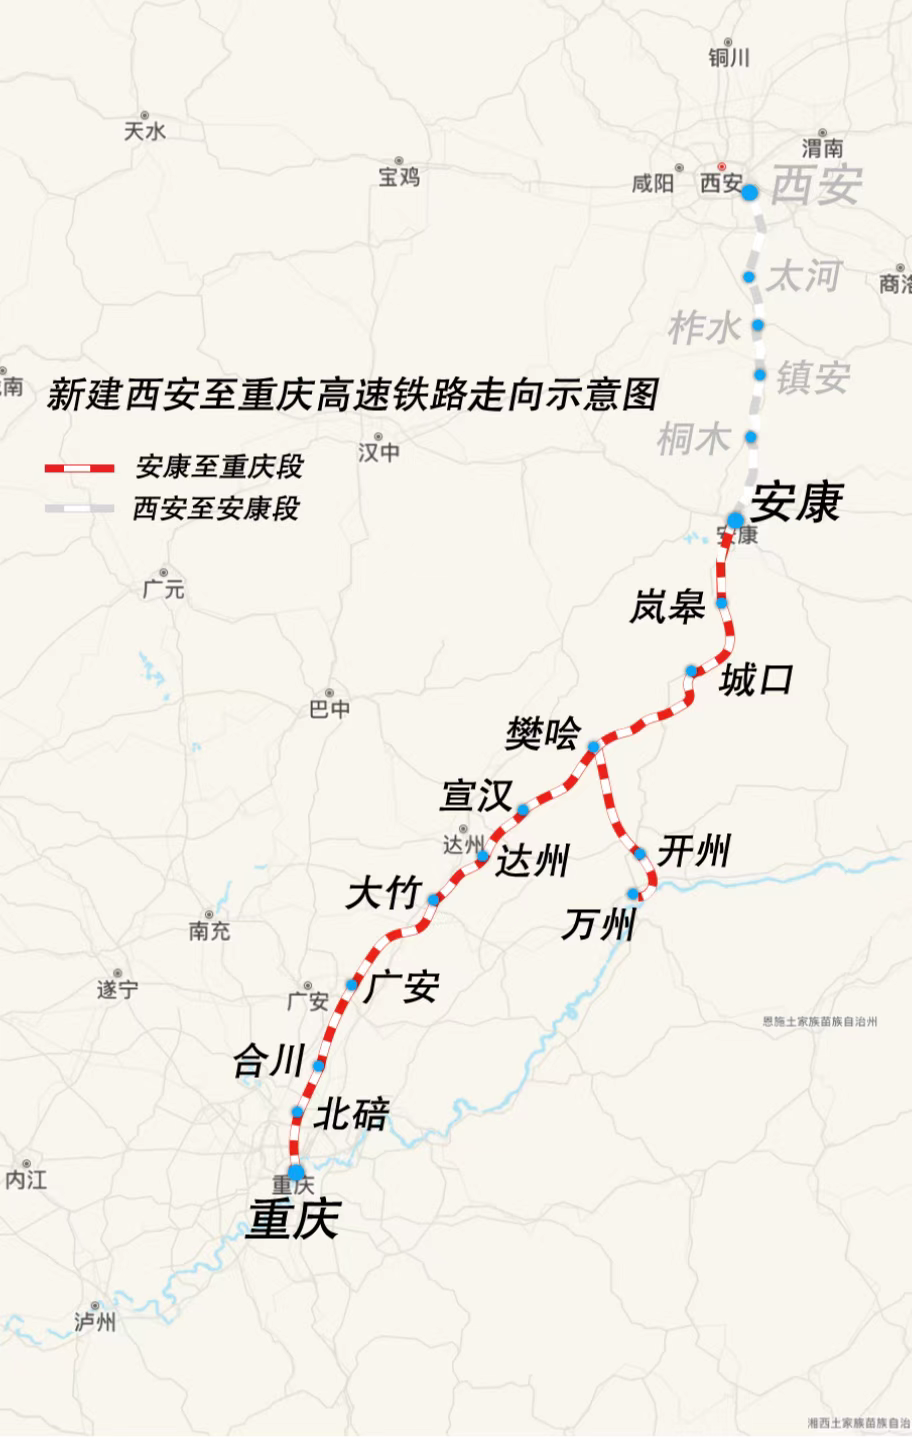 Trending diagram of Chongqing-Xi’an High-speed Railway. (Picture provided by Railway Department)